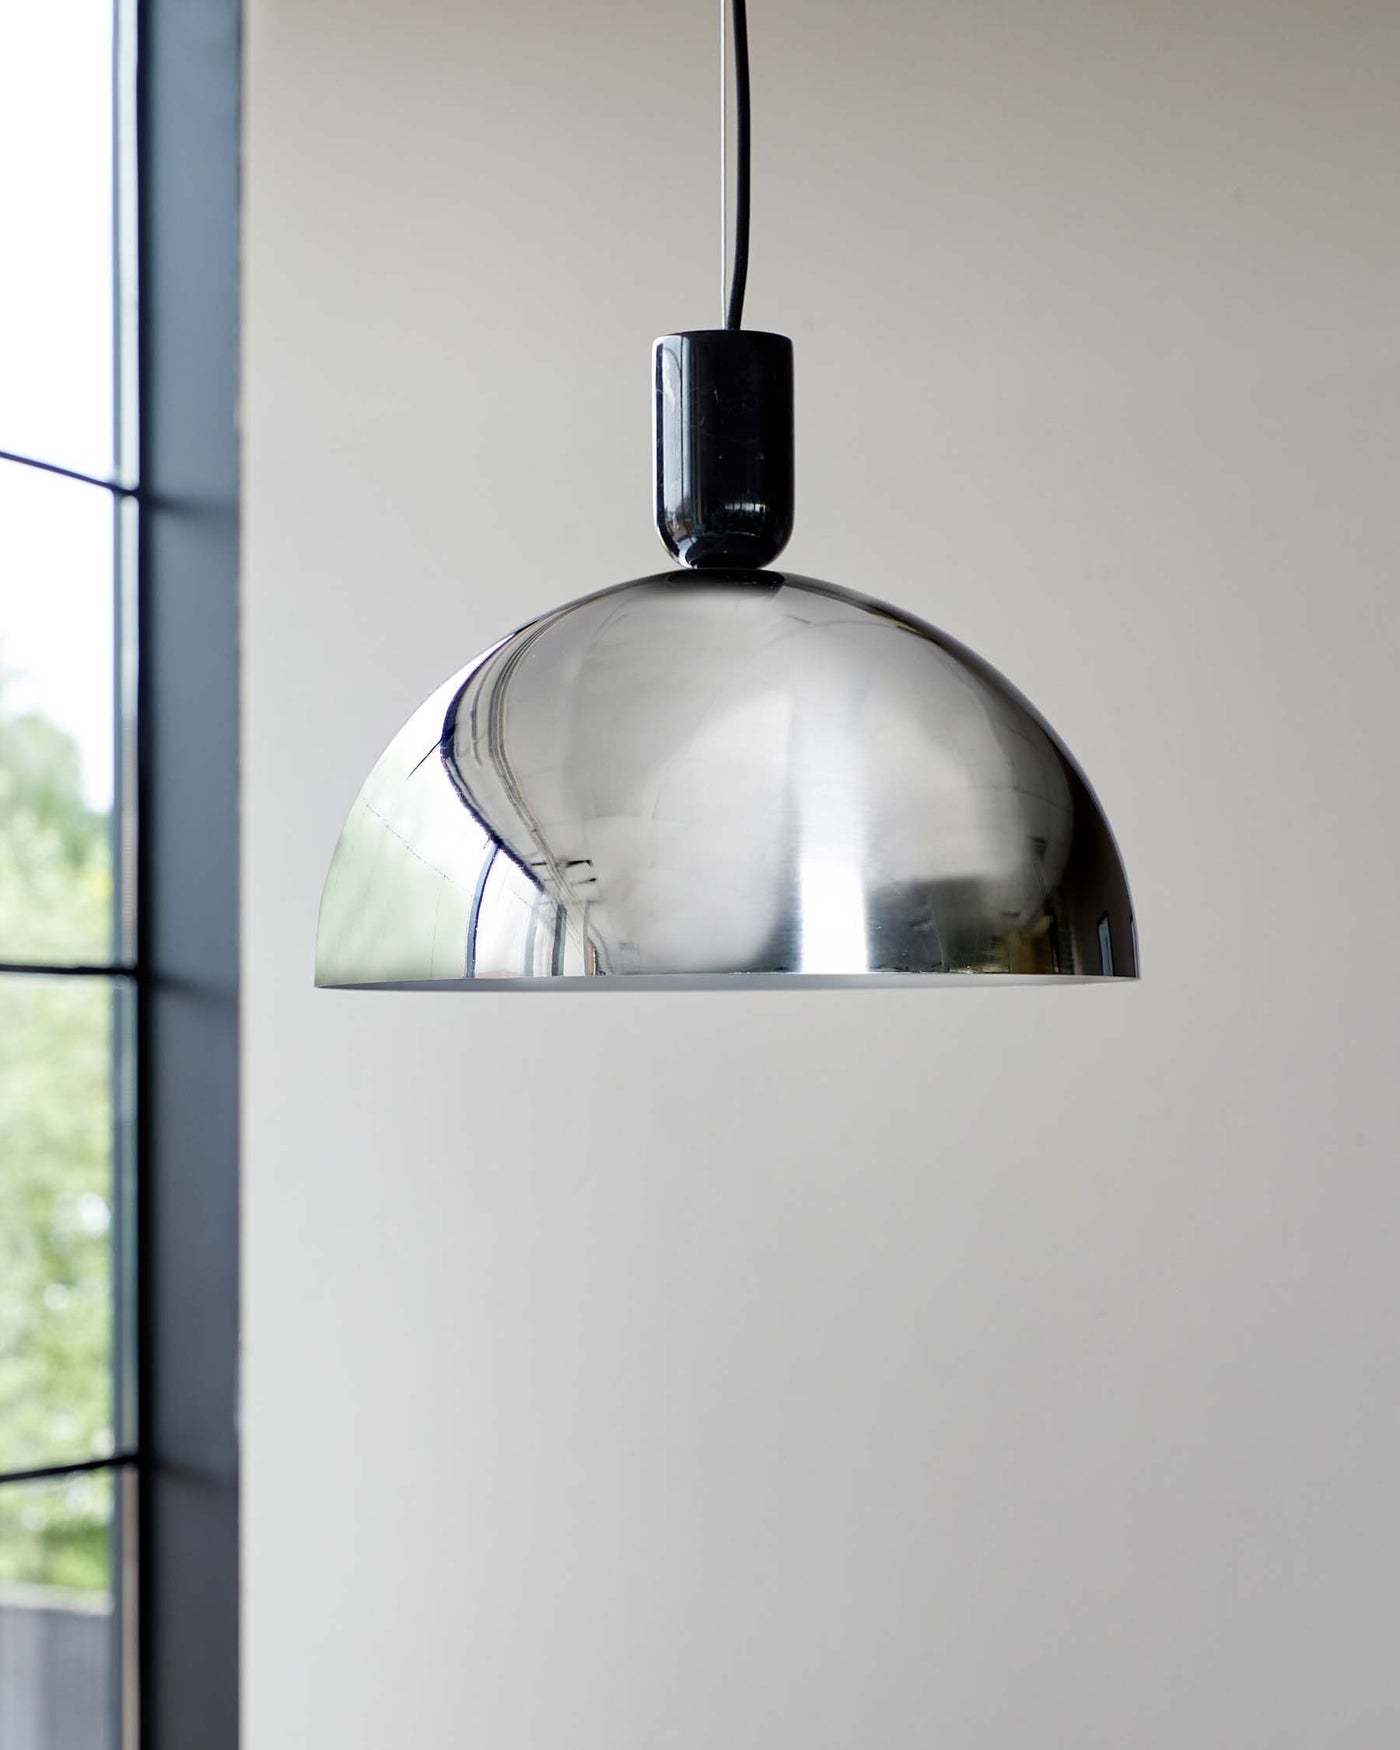 Modern pendant light with a polished chrome dome-shaped shade hanging from a black cord against a neutral background with a windowpane to the left.